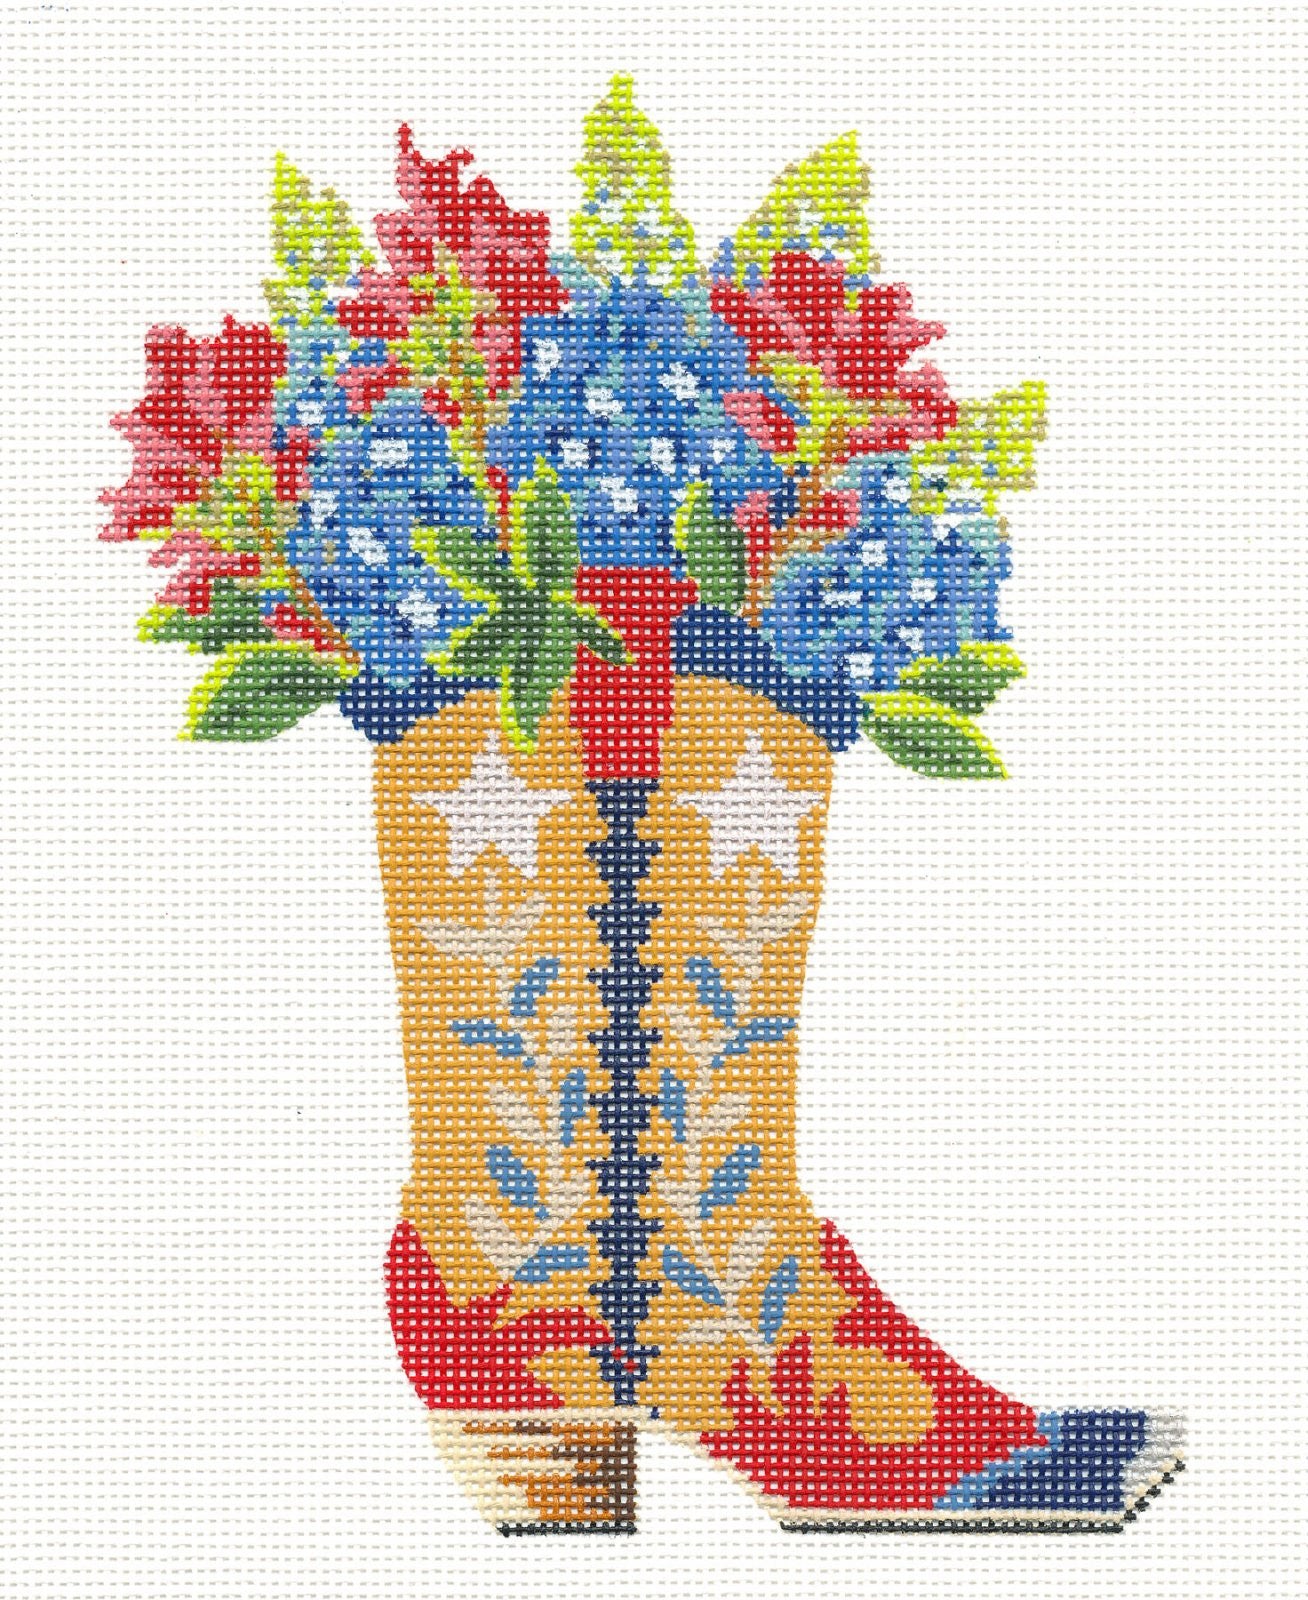 TEXAS ~ Texas Boot with Bluebonnets and Red Flowers handpainted Needlepoint Canvas by Kelly Clark